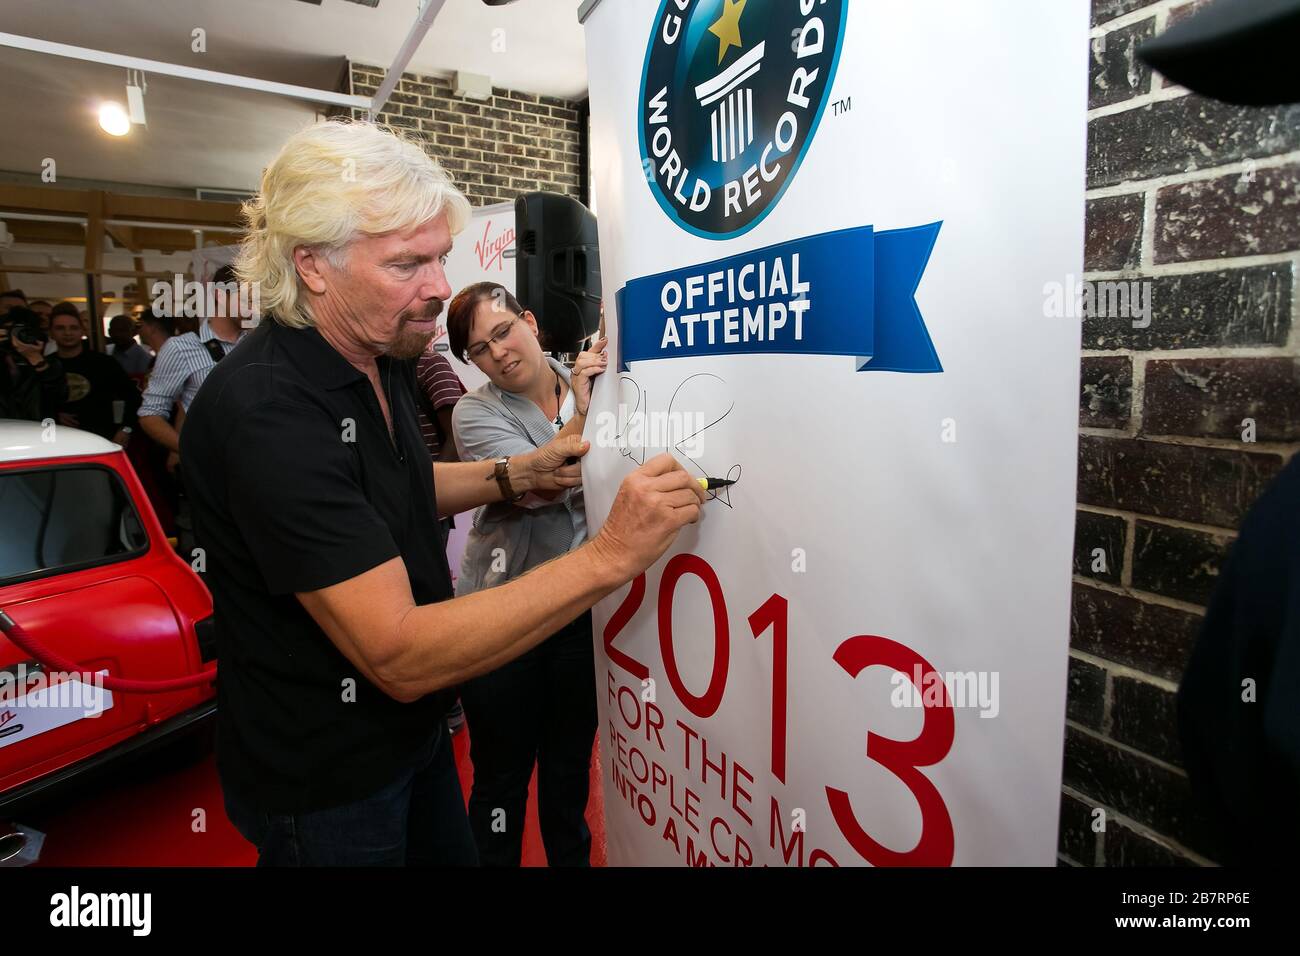 Johannesburg, South Africa - October 02, 2013: Richard Branson signing autographs at Virgin Mobile Guinness World Record attempt and achieved fitting Stock Photo